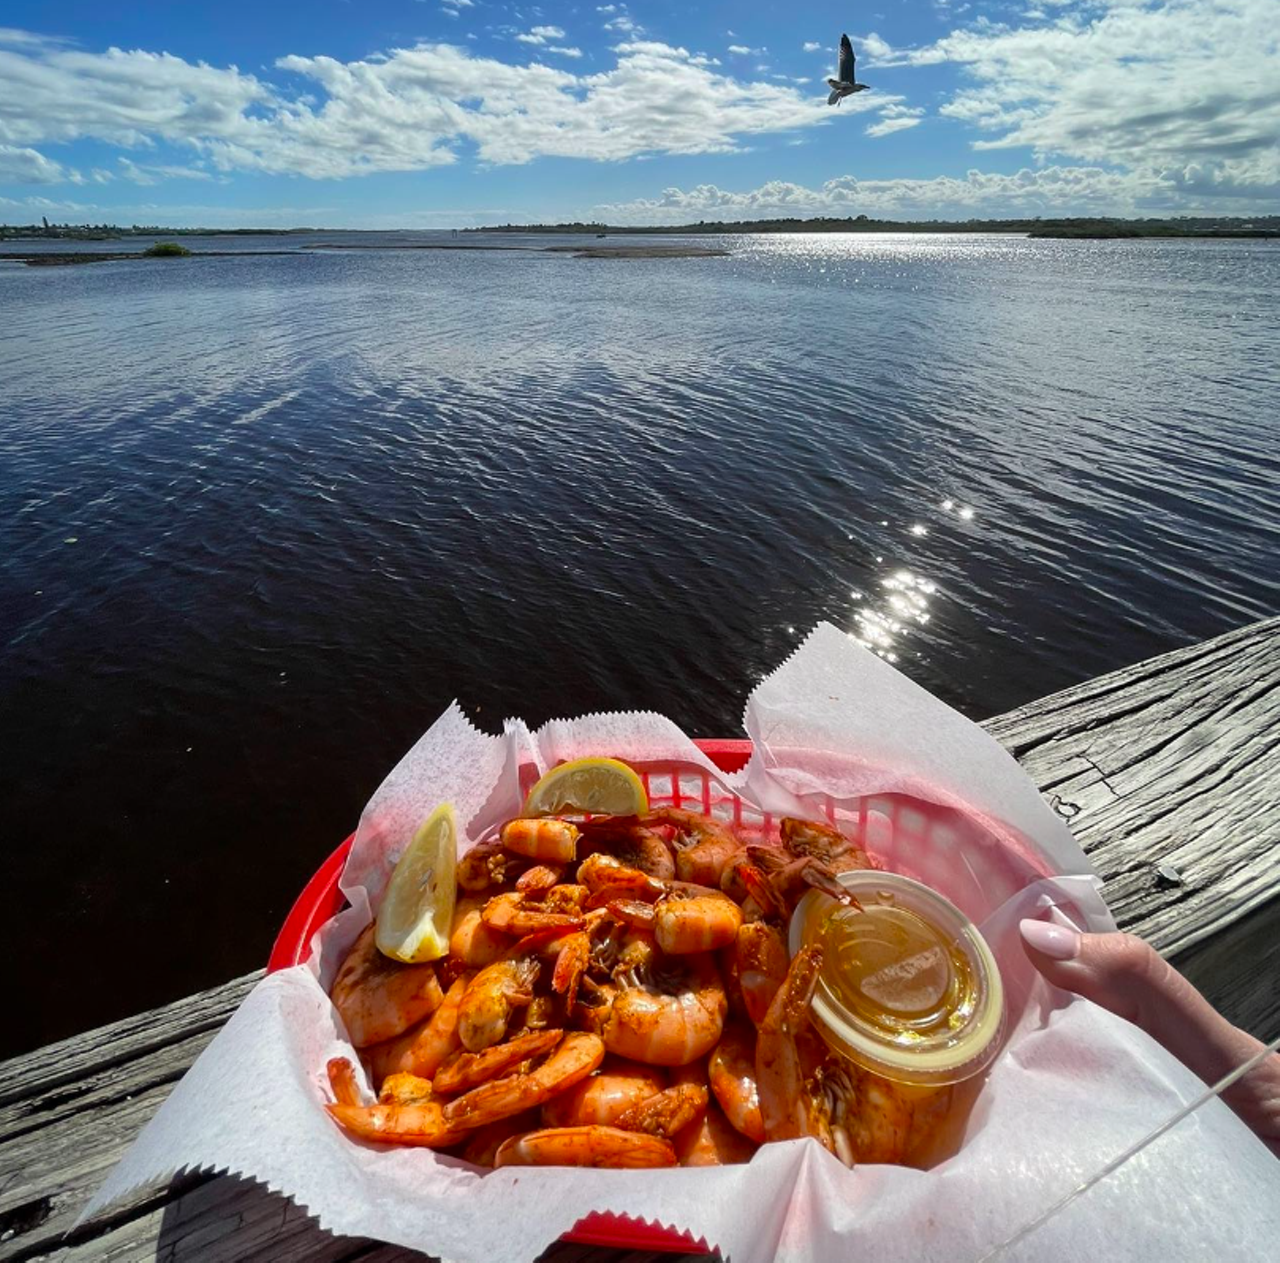 Our Deck Down Under
78 Dunlawton Ave., Port Orange
This Volusia county favorite seafood shack offers not only a beefy menu and waterfront views in every direction, there's also a full bar and a boat dock for easy river access.